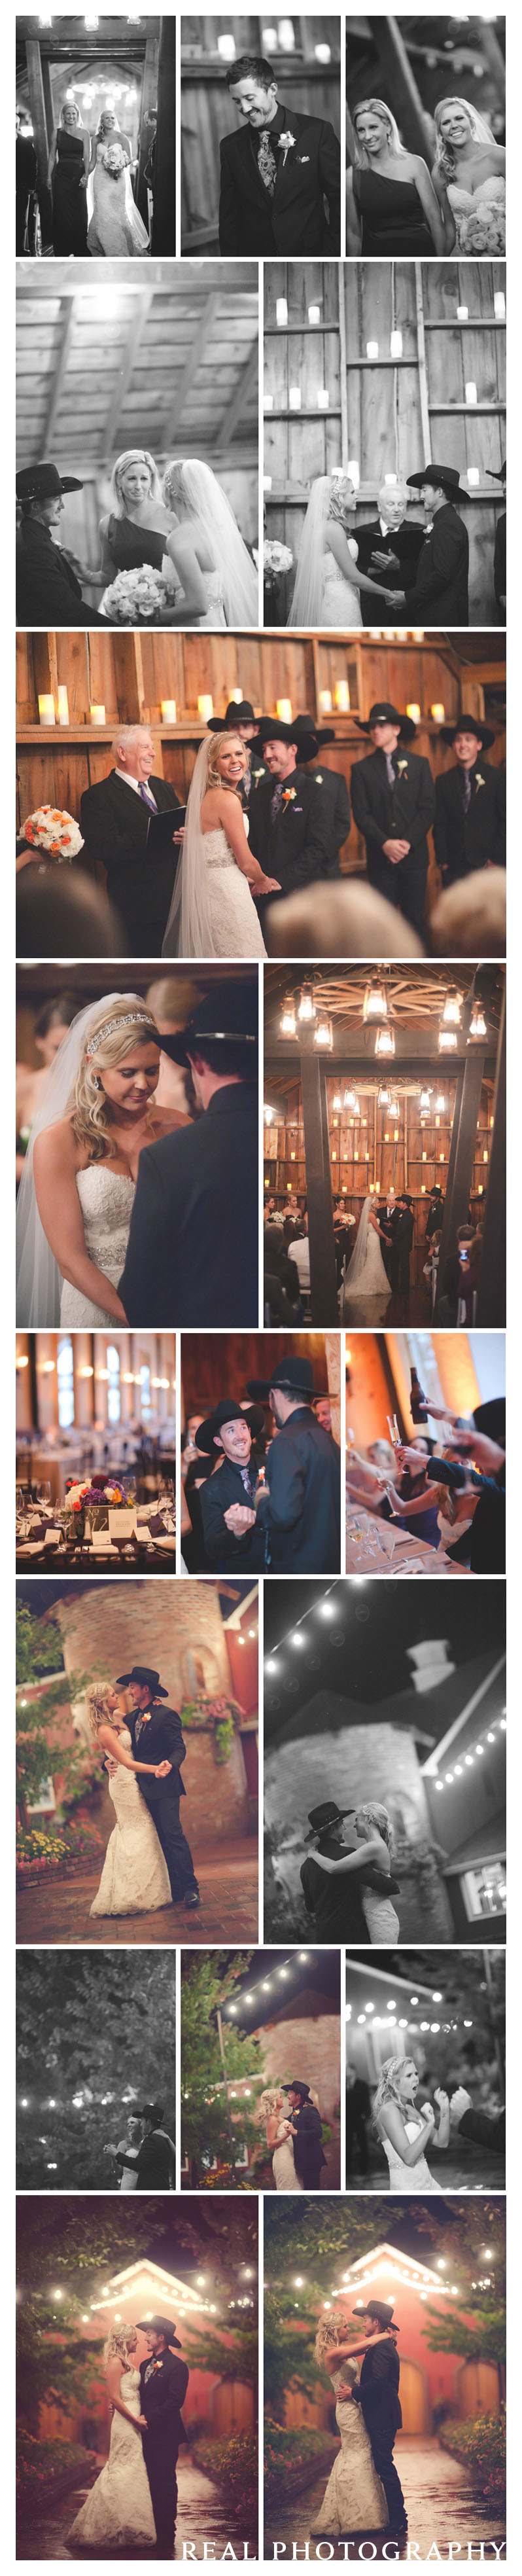 crooked_willow_farms_indoor_ceremony